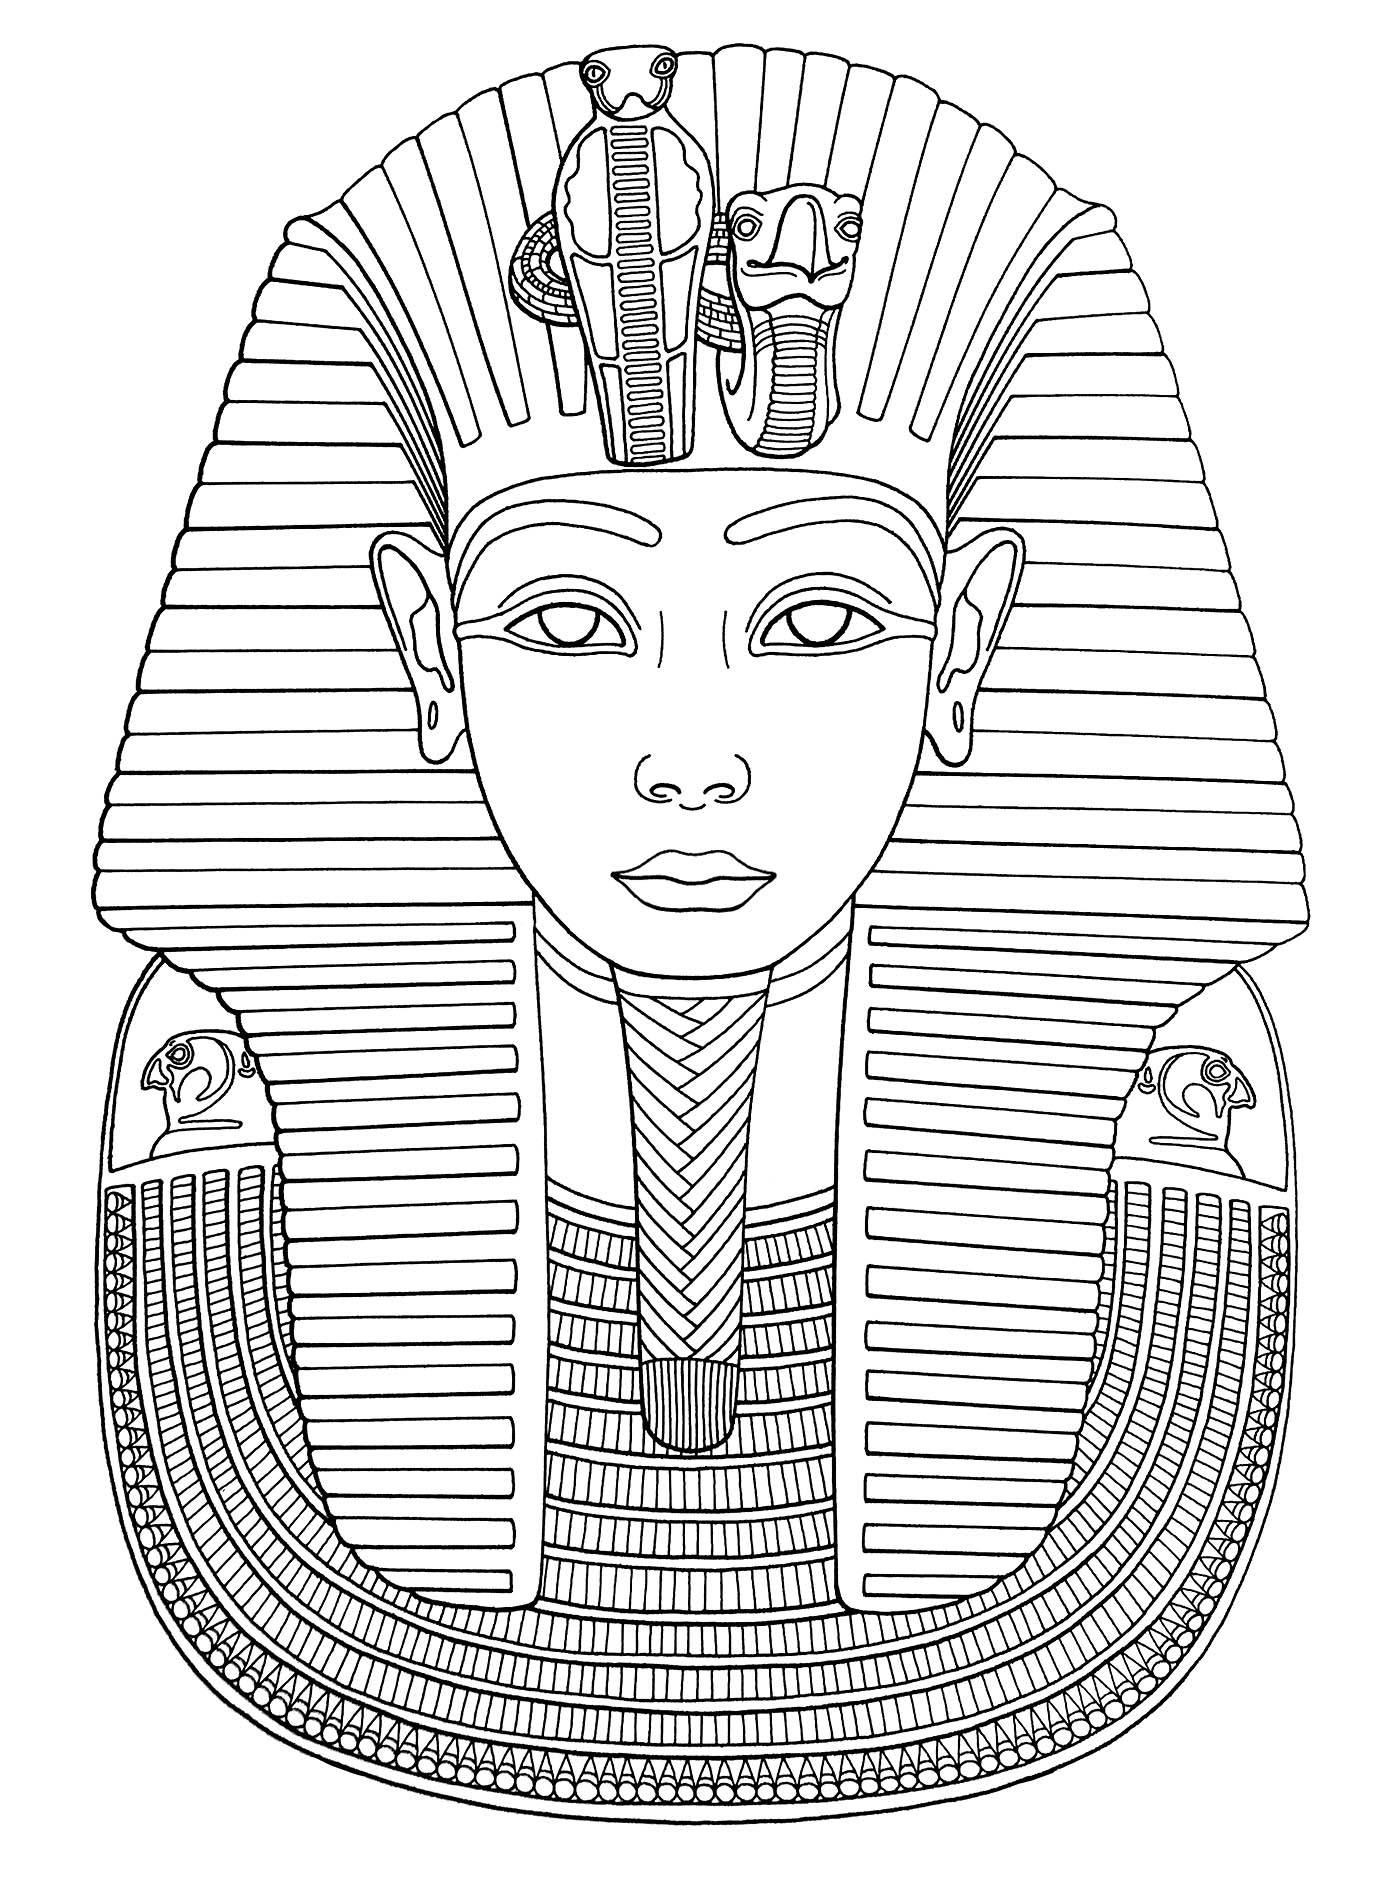 egyptian death mask template